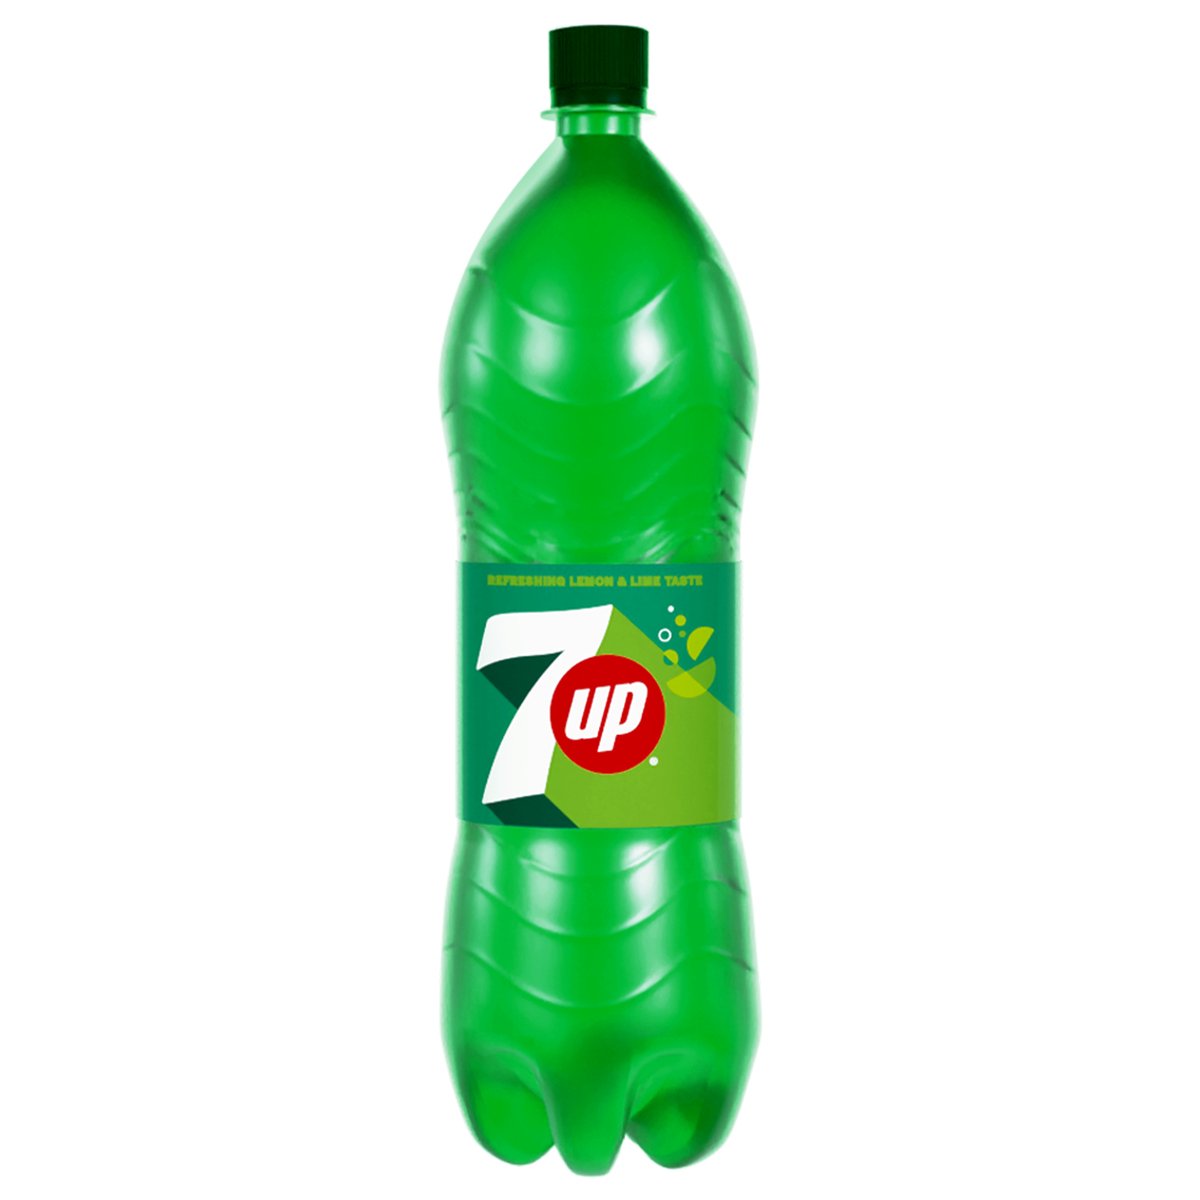 7UP Carbonated Soft Drink 1.5 Litres